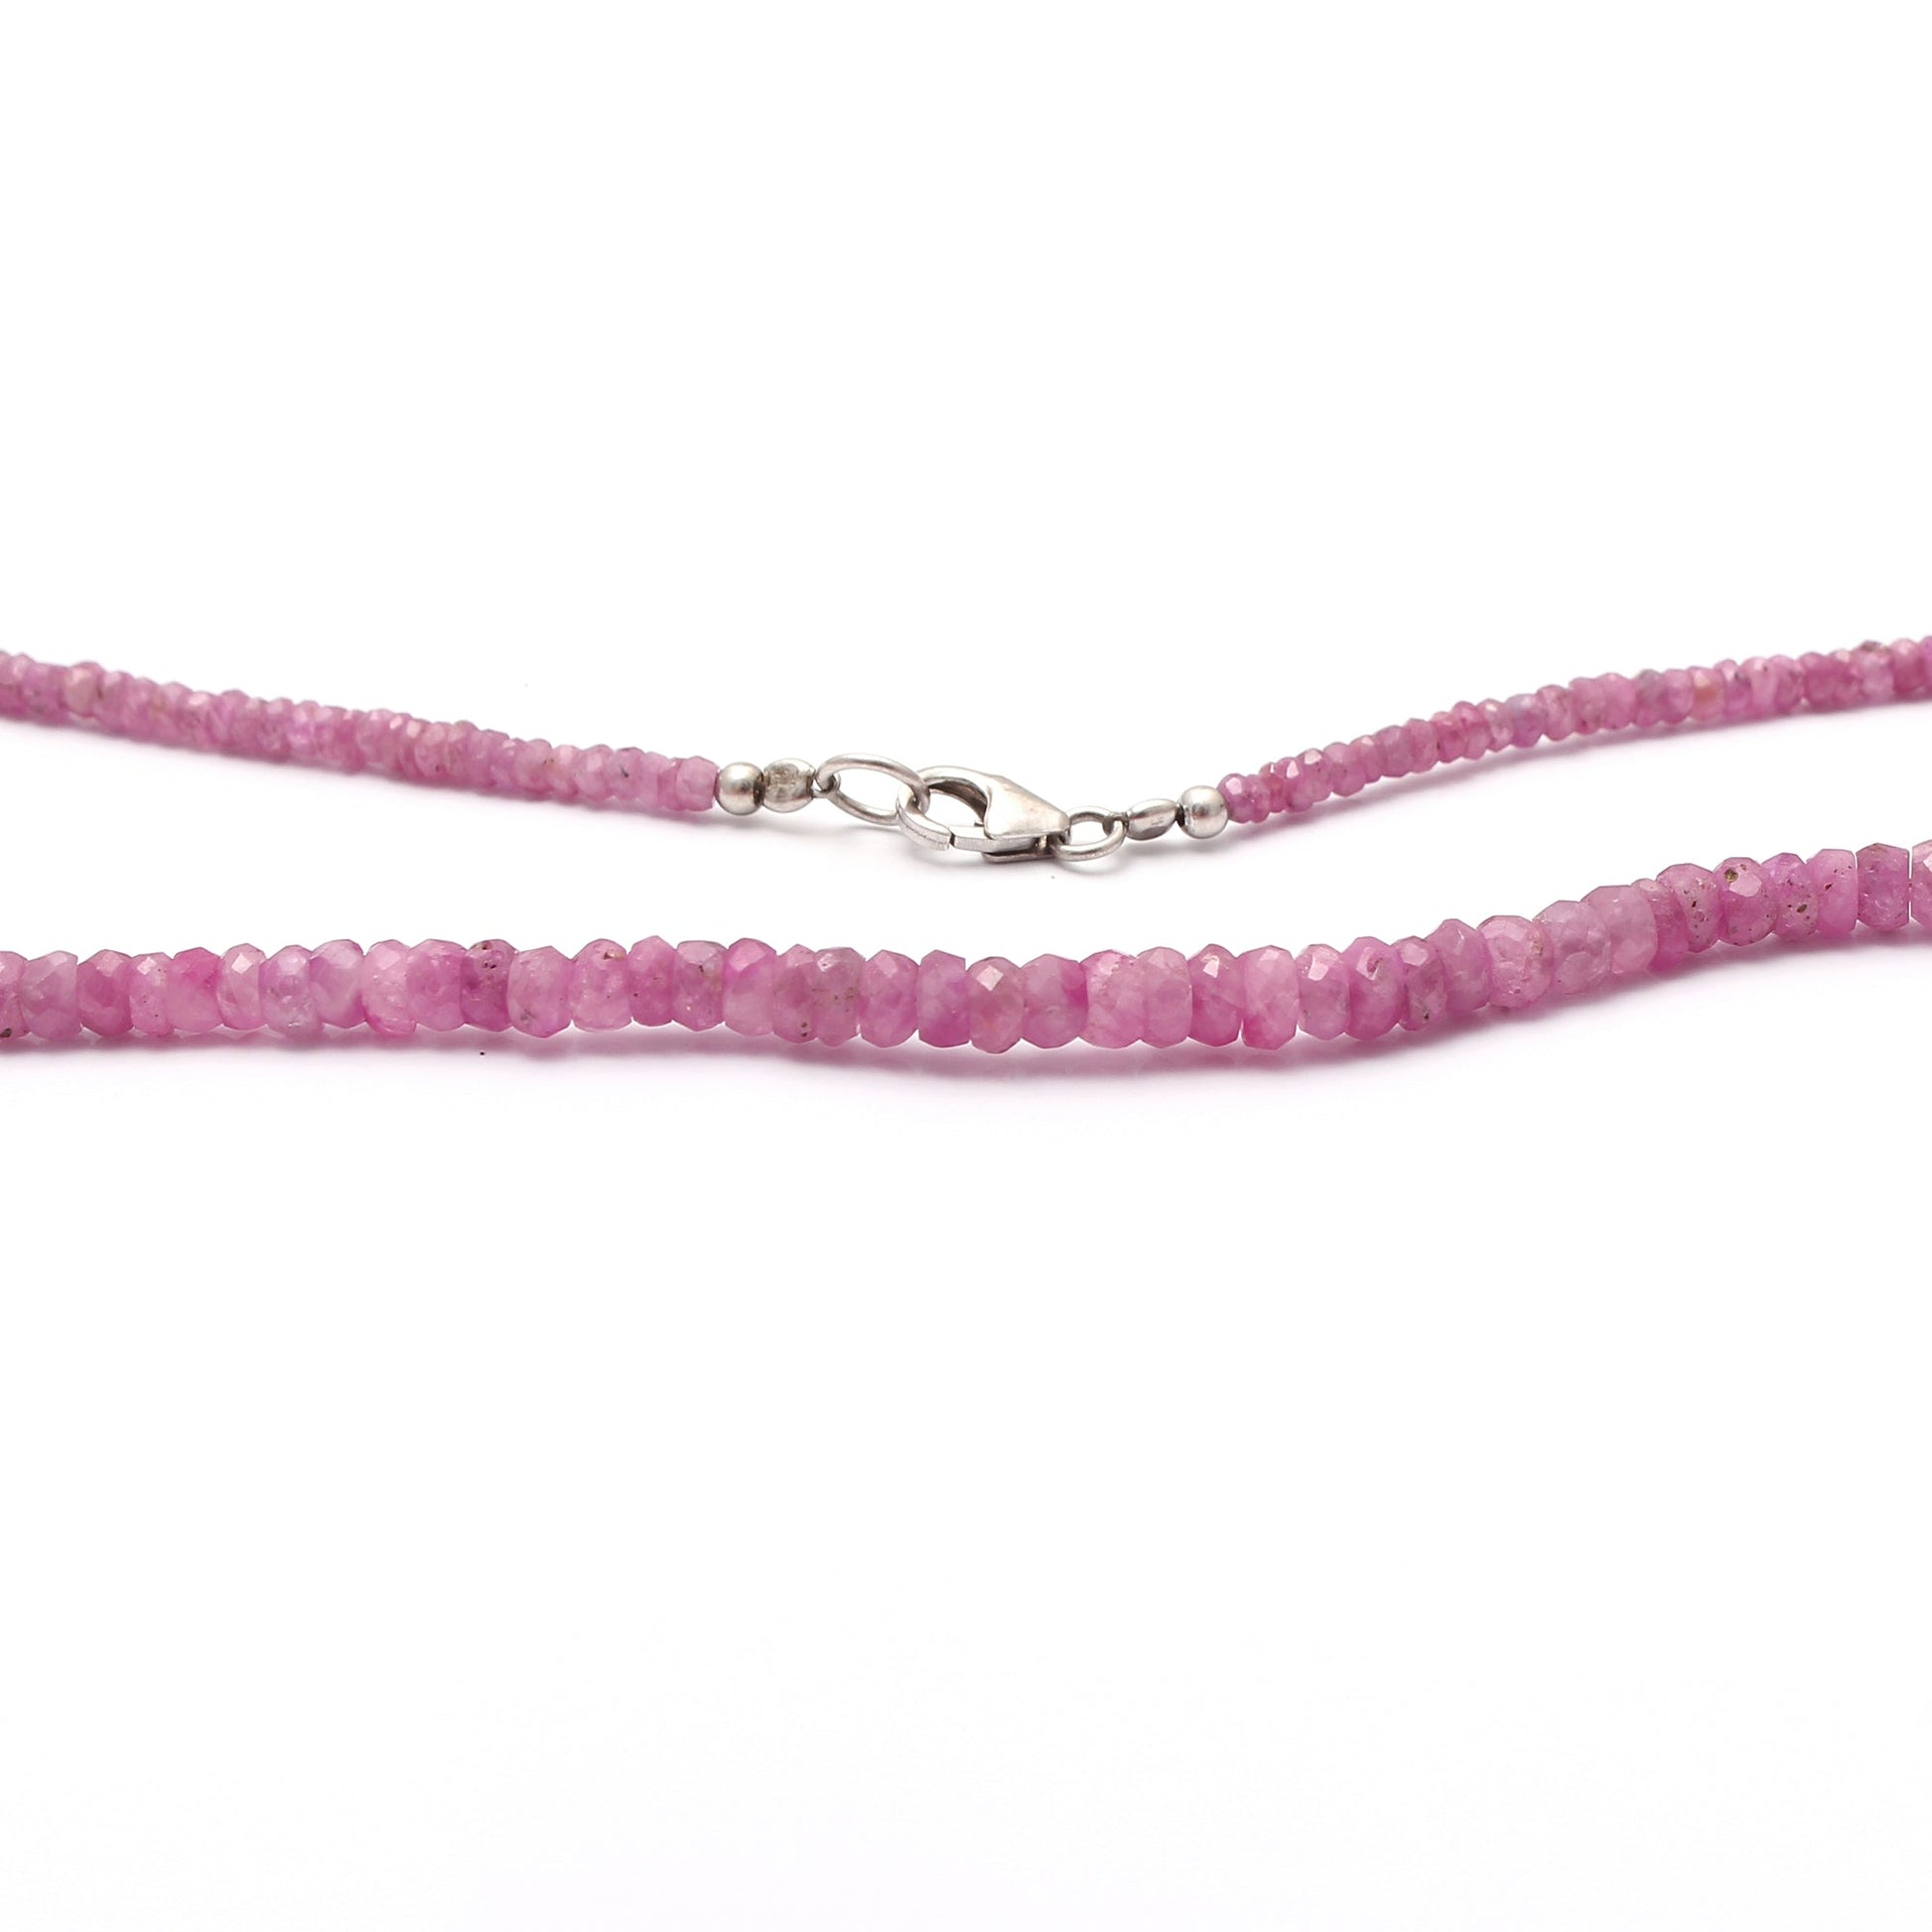 Dainty Ruby Necklace, Beaded Handmade Necklace, Birthday Gift For Wife GemsRush